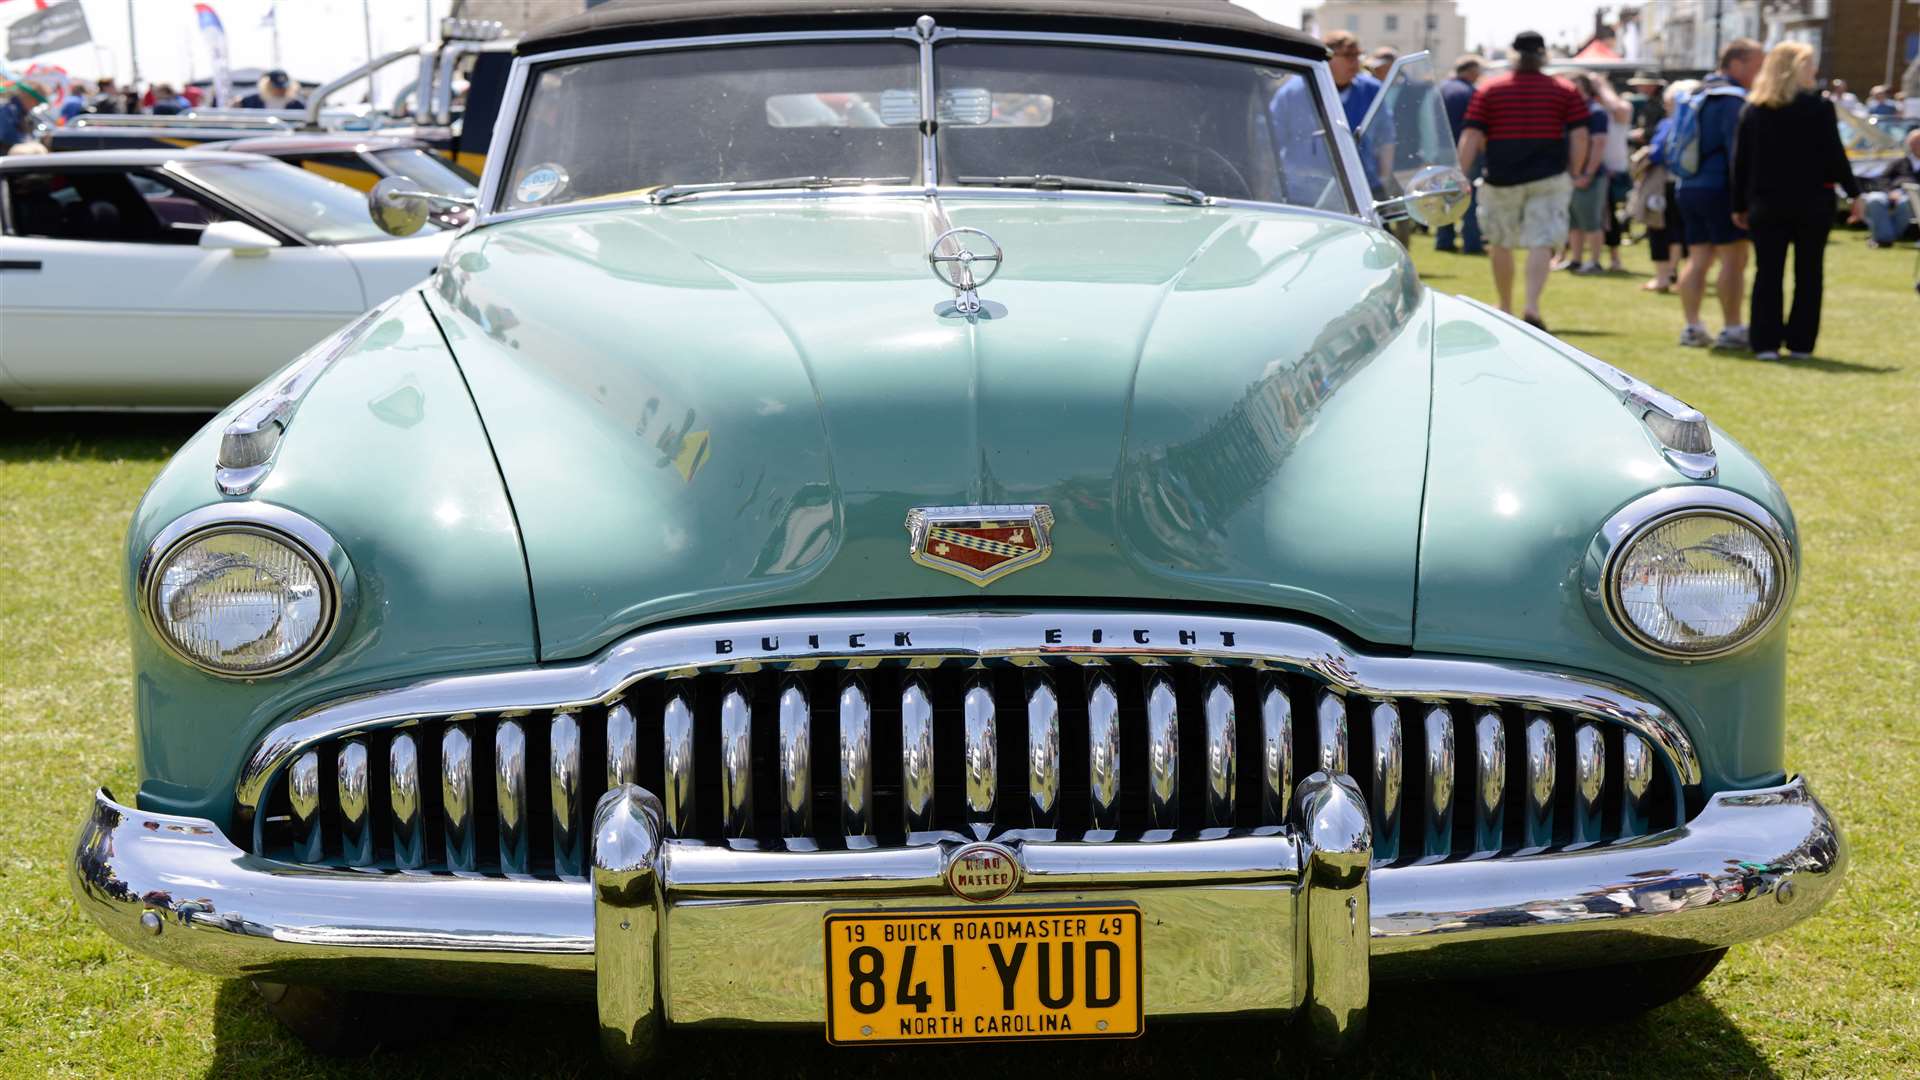 Last year a 1949 Buick Roadmaster was exhibited